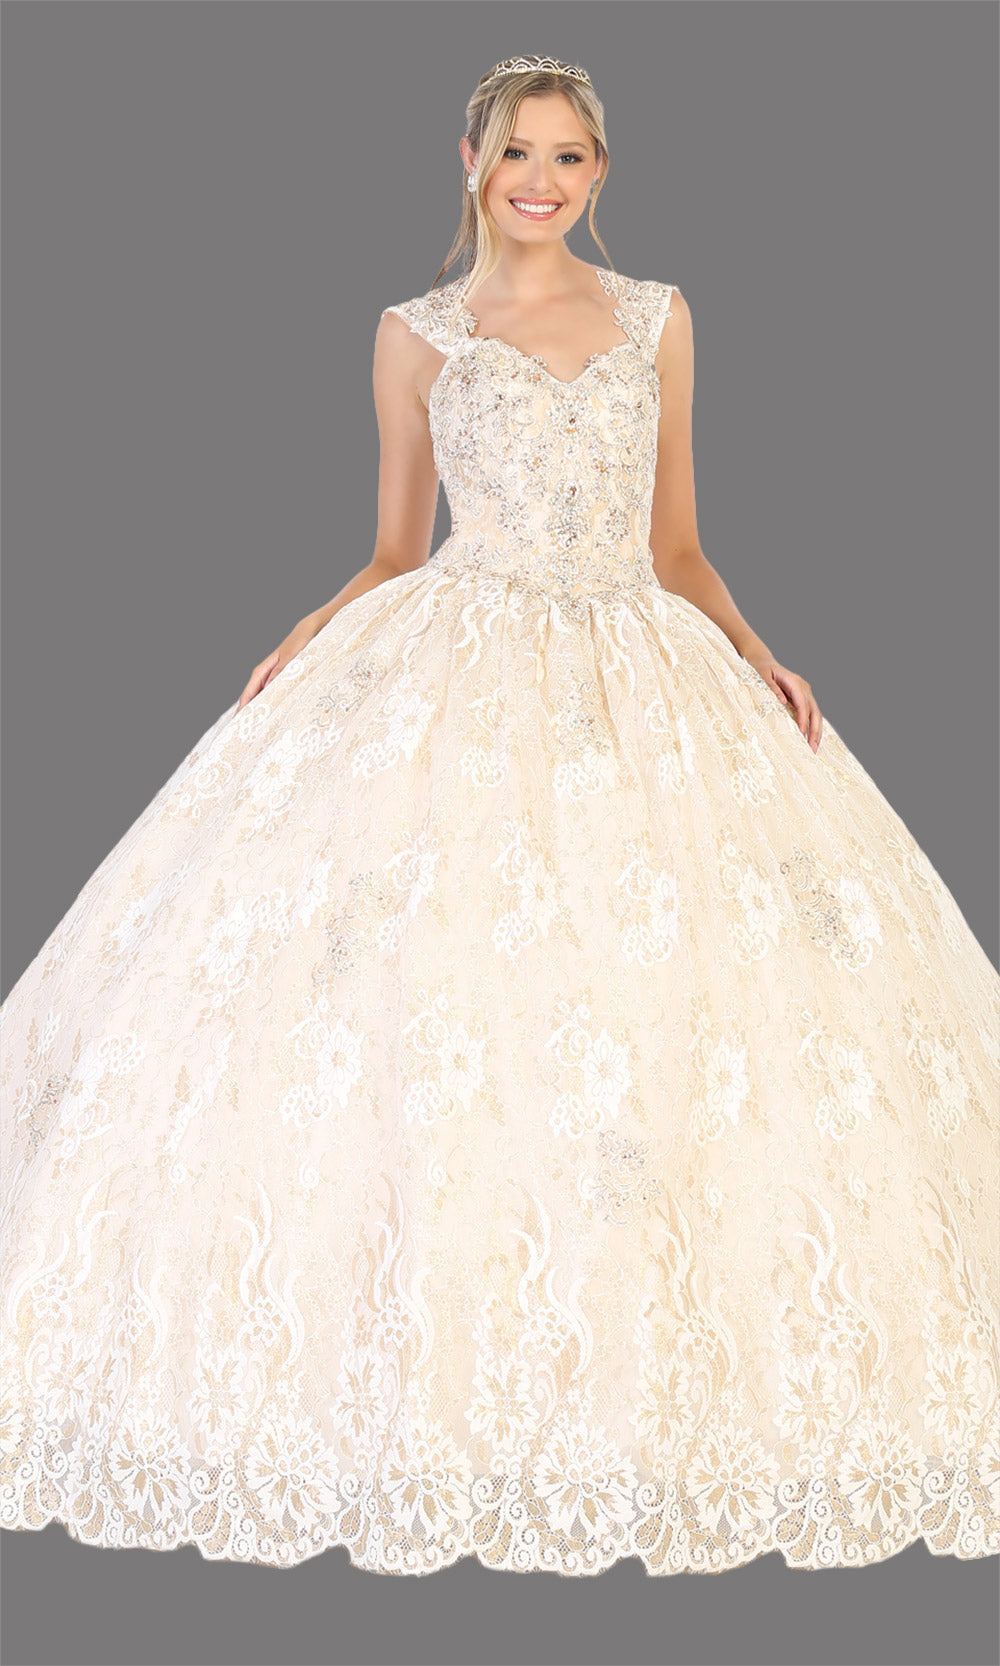 Mayqueen LK131 Long Ivory Corset Ballgown|Quinceanera|Engagement